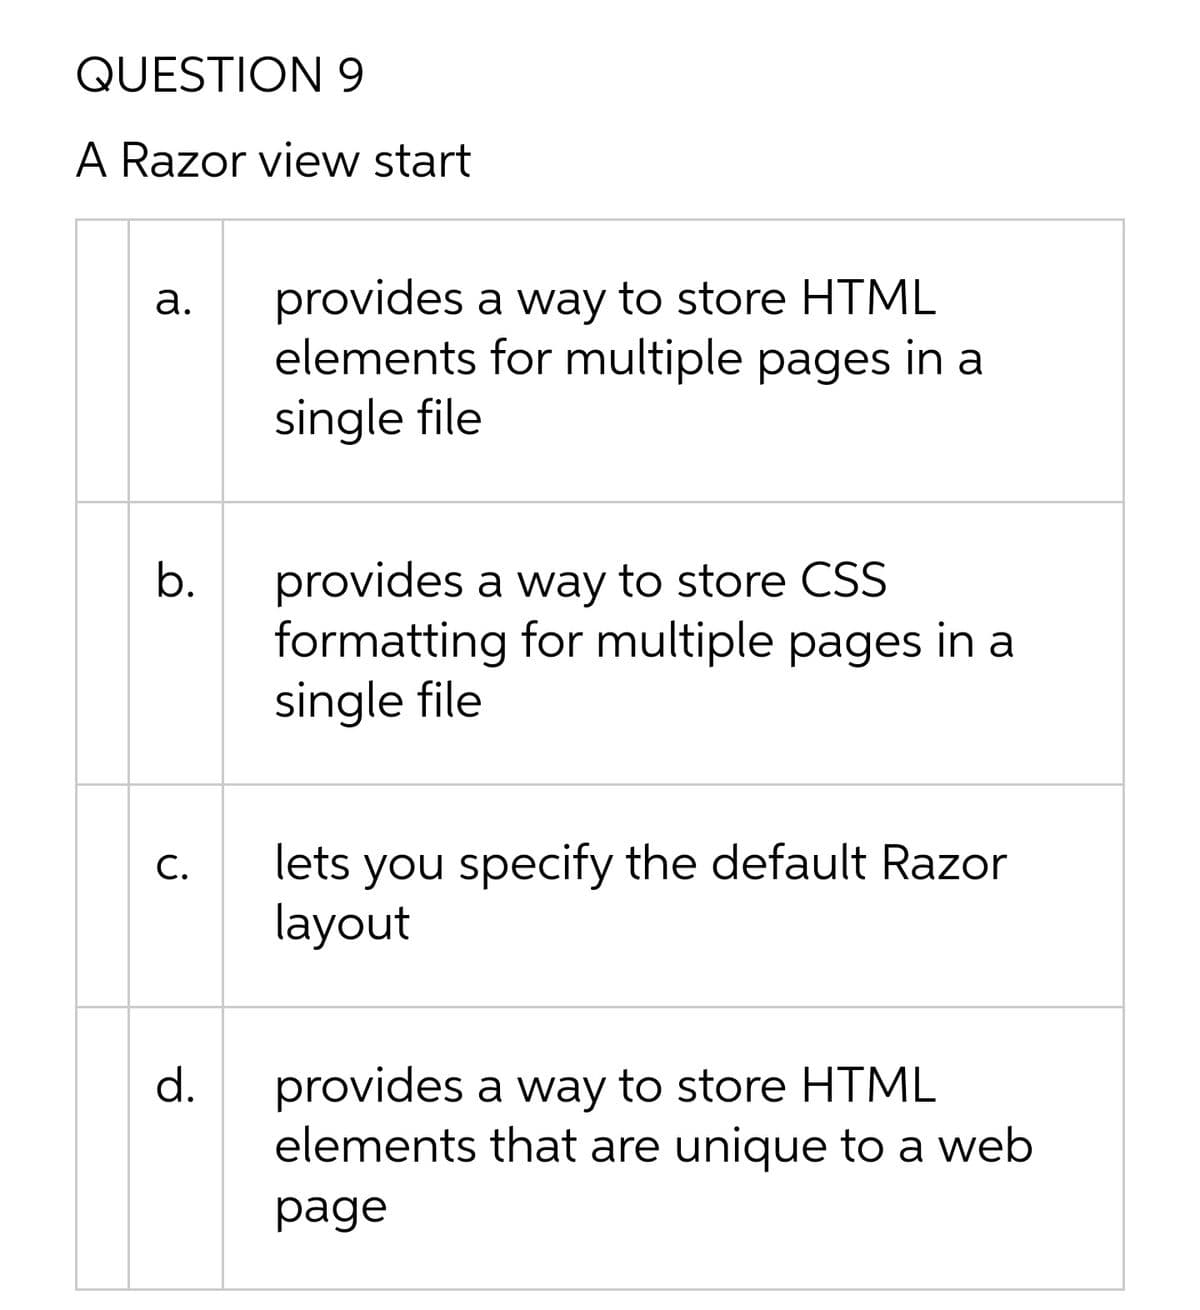 QUESTION 9
A Razor view start
provides a way to store HTML
elements for multiple pages in a
single file
а.
provides a way to store CSS
formatting for multiple pages in a
single file
b.
lets you specify the default Razor
layout
С.
provides a way to store HTML
elements that are unique to a web
d.
рage
